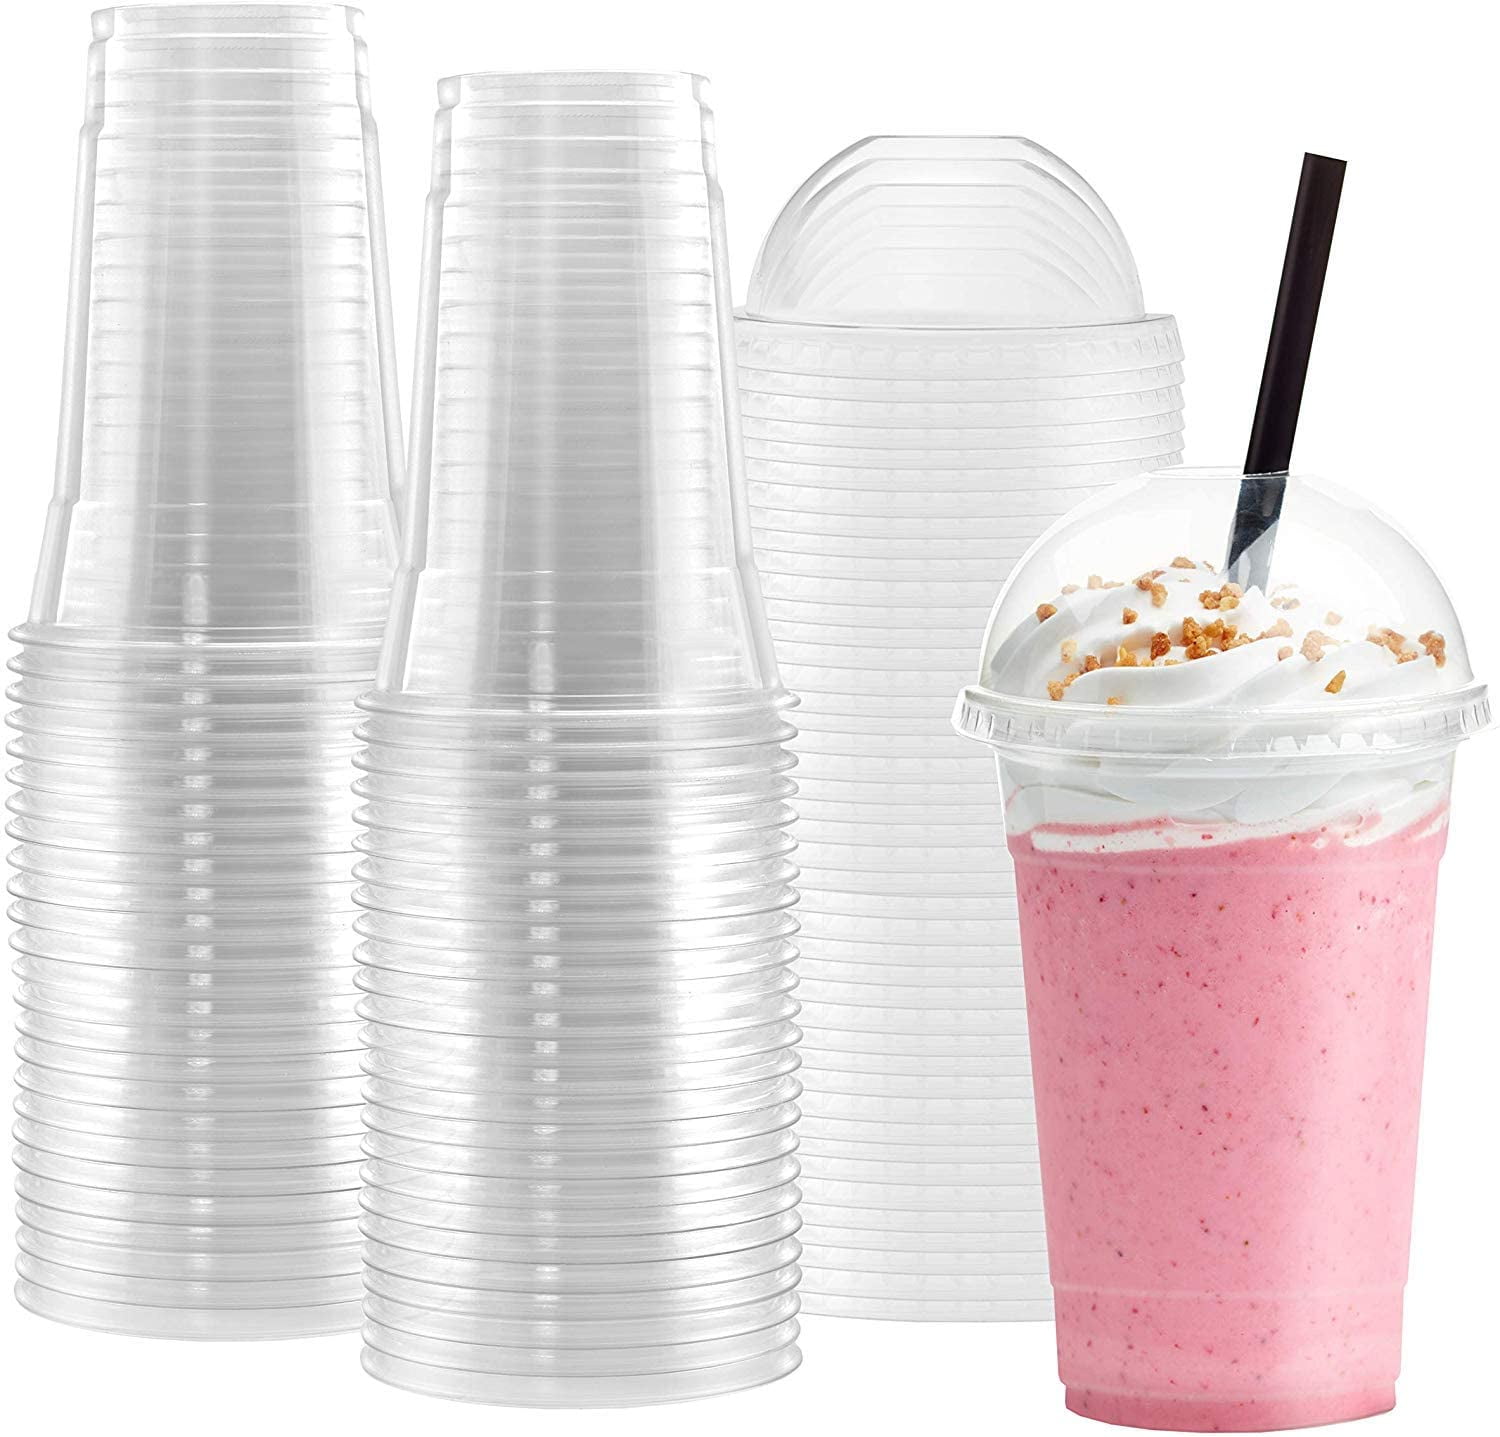 Domed Lids Plastic Milkshake Glasses 50 x Disposable Cups Glass Cup No Hole 